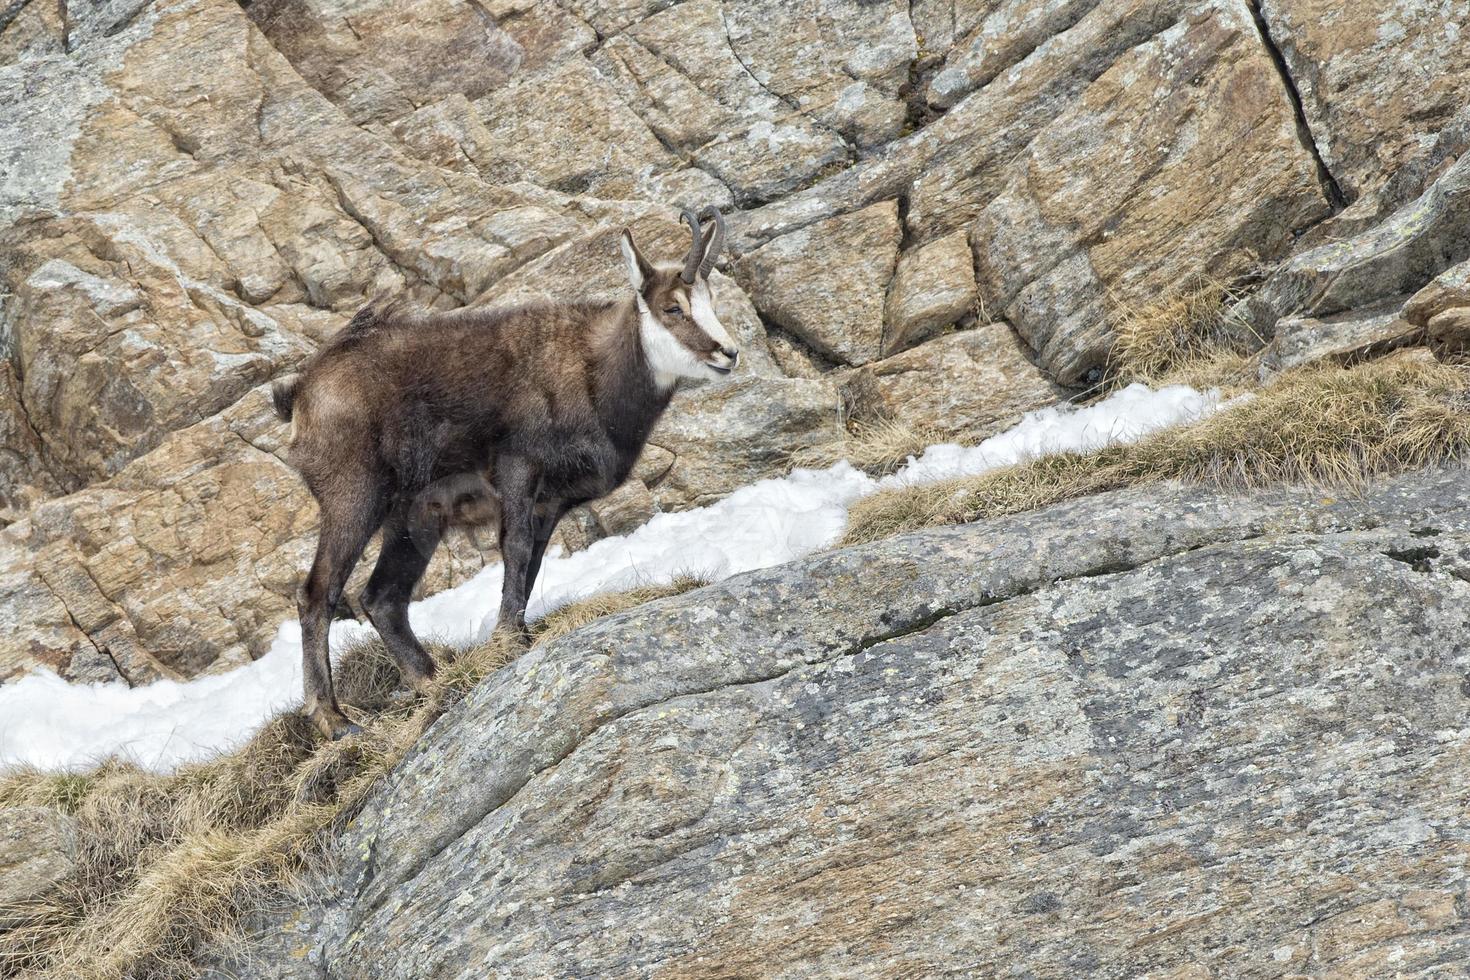 Chamois deer in the rocks background photo